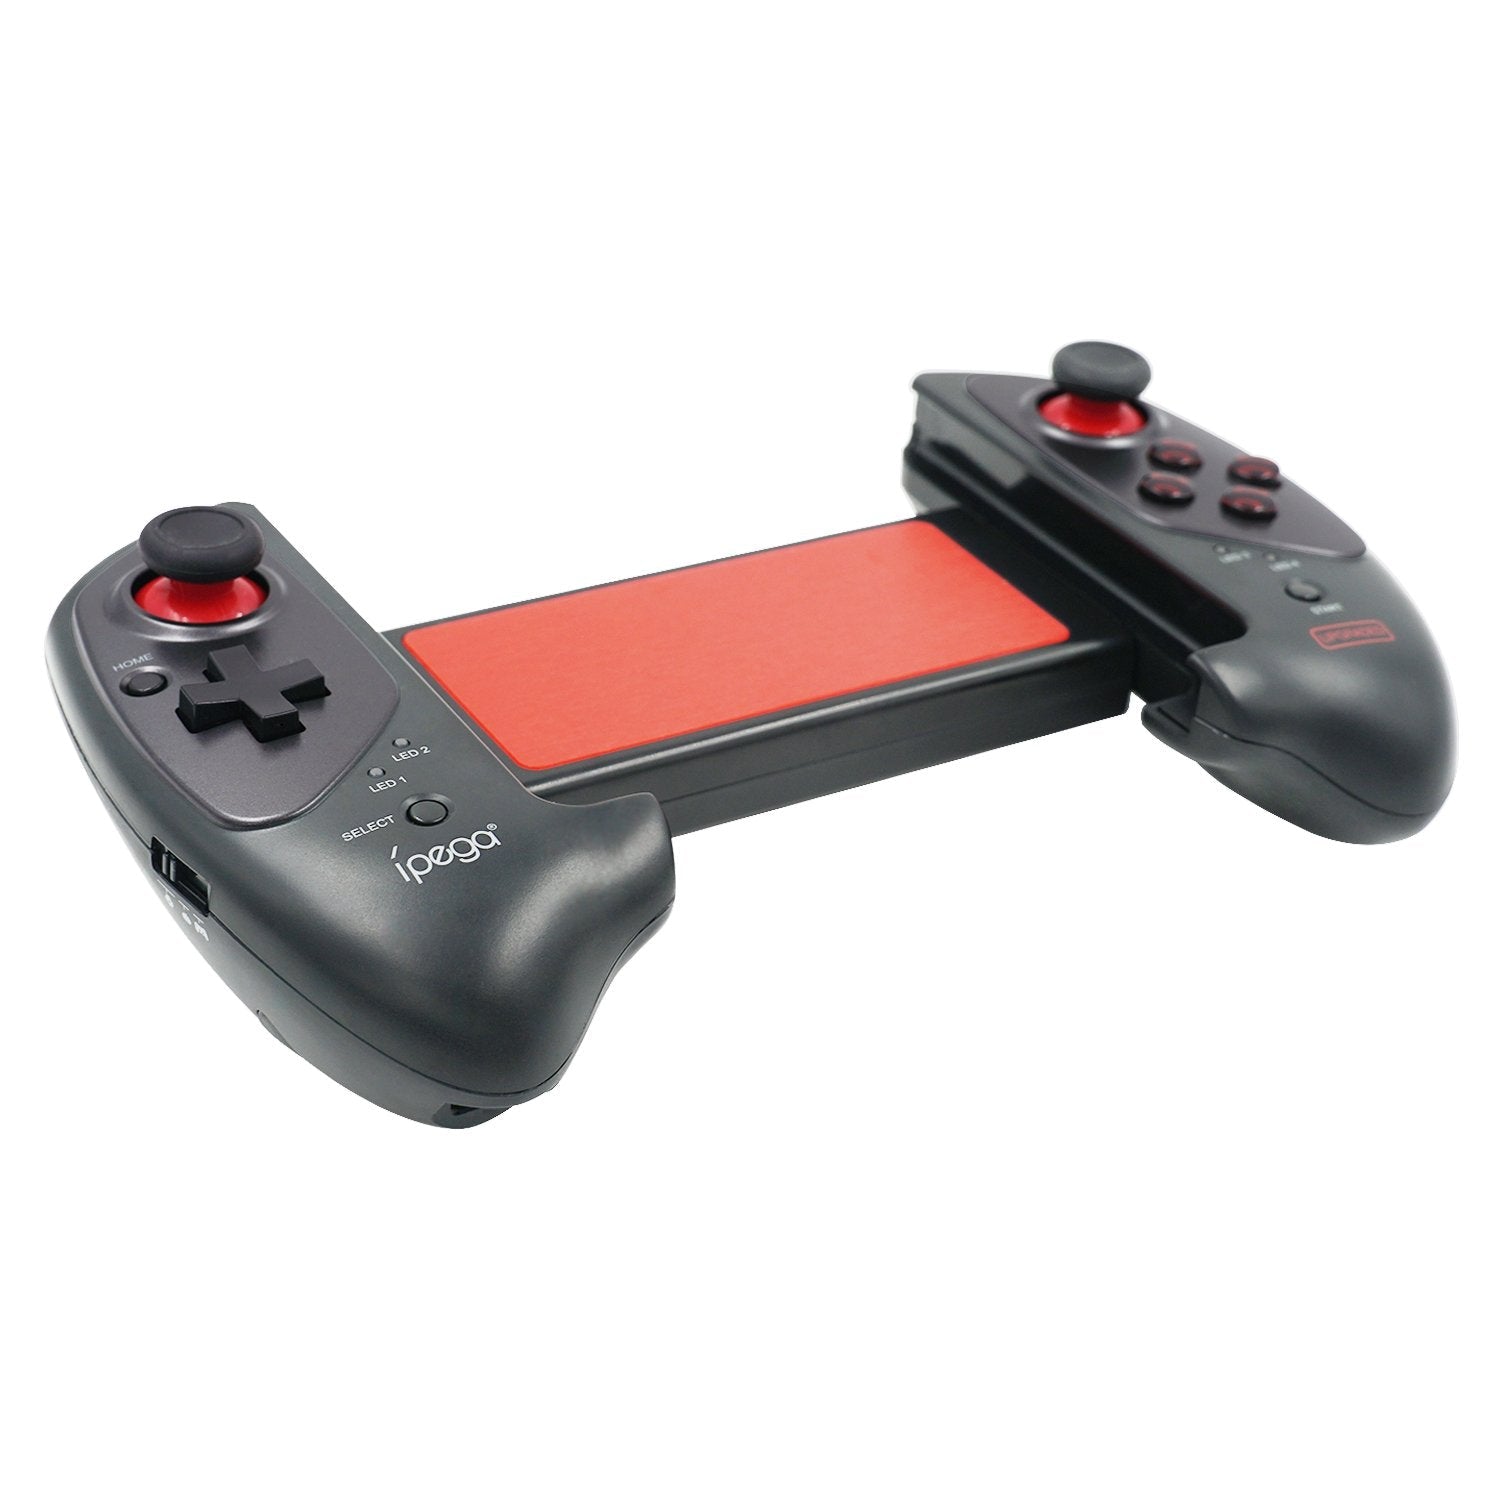 Gaming-IPEGA PG-9083S Bluetooth Stretching Gamepad for Android/iOS/Windows PC